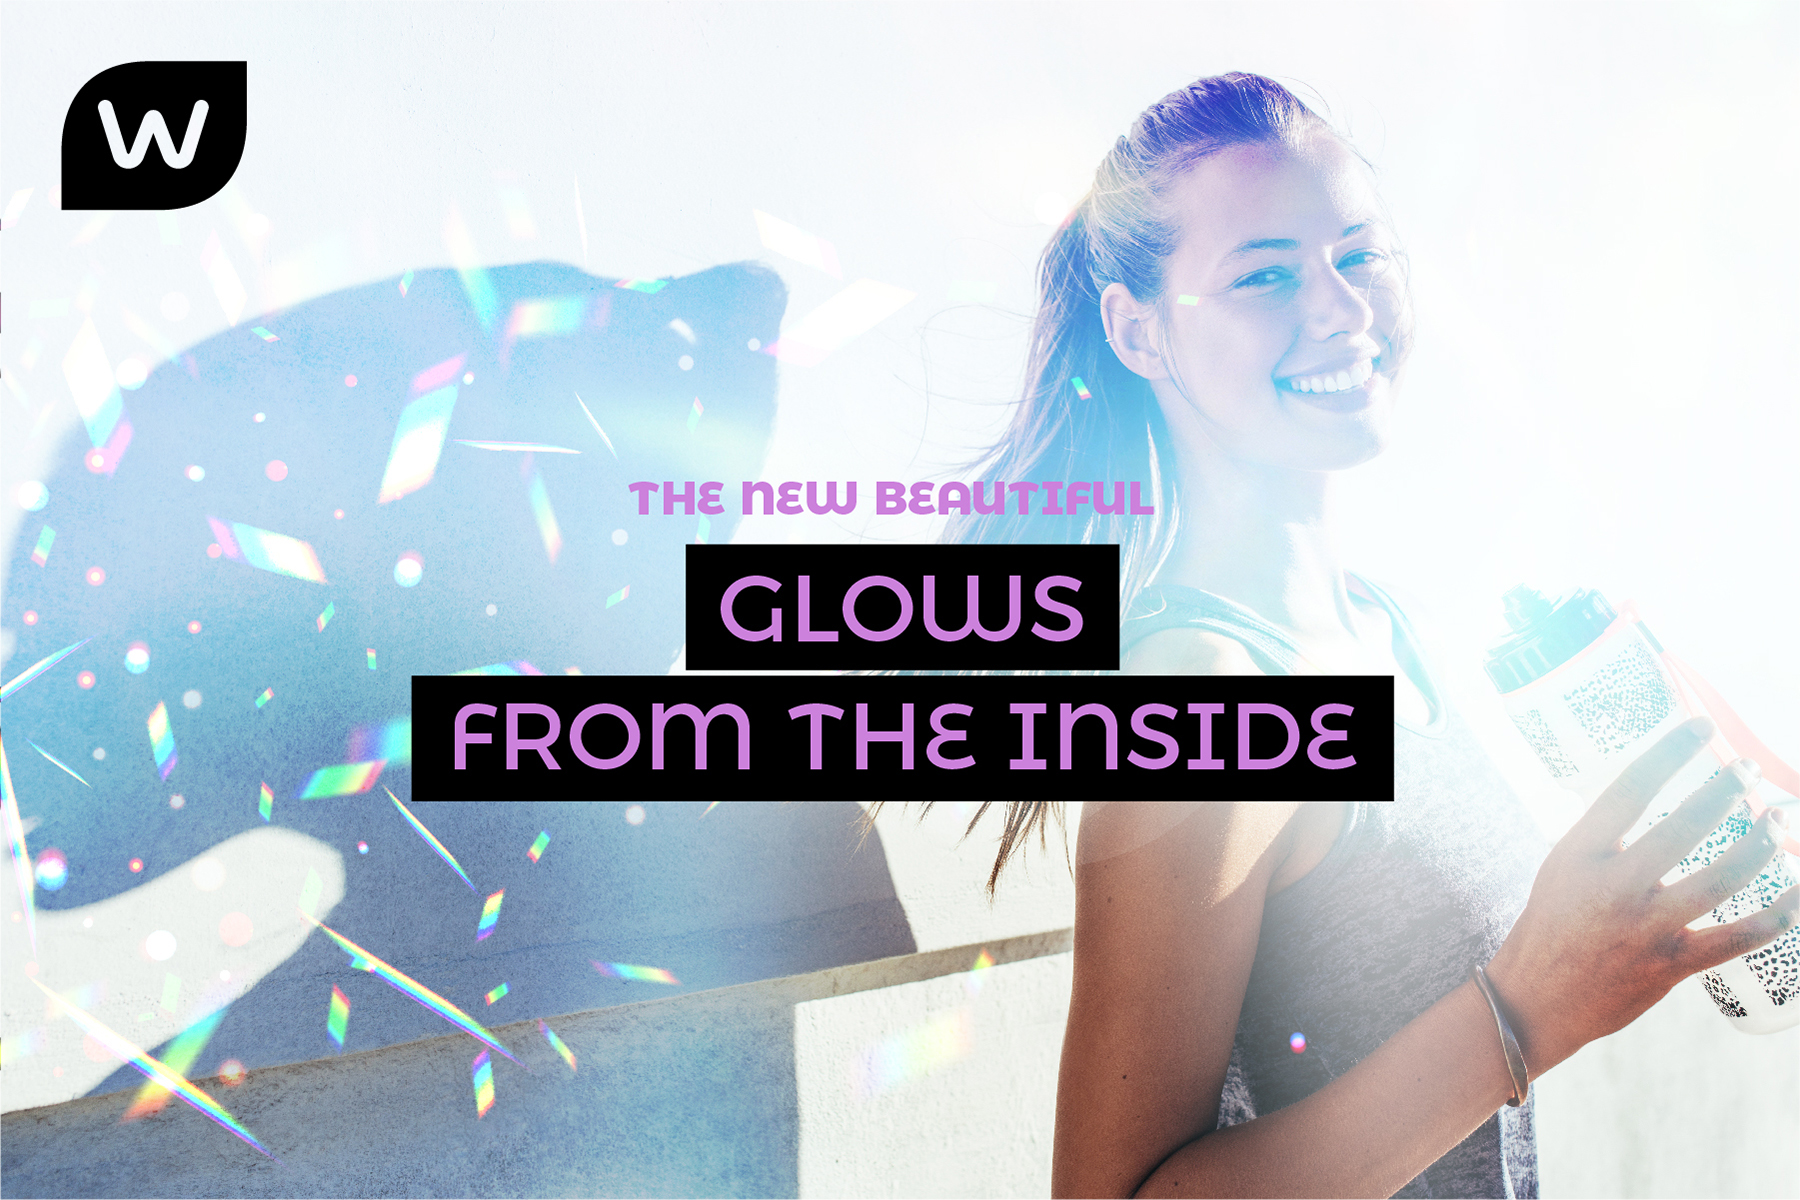 The New Beautiful - Glows from the inside